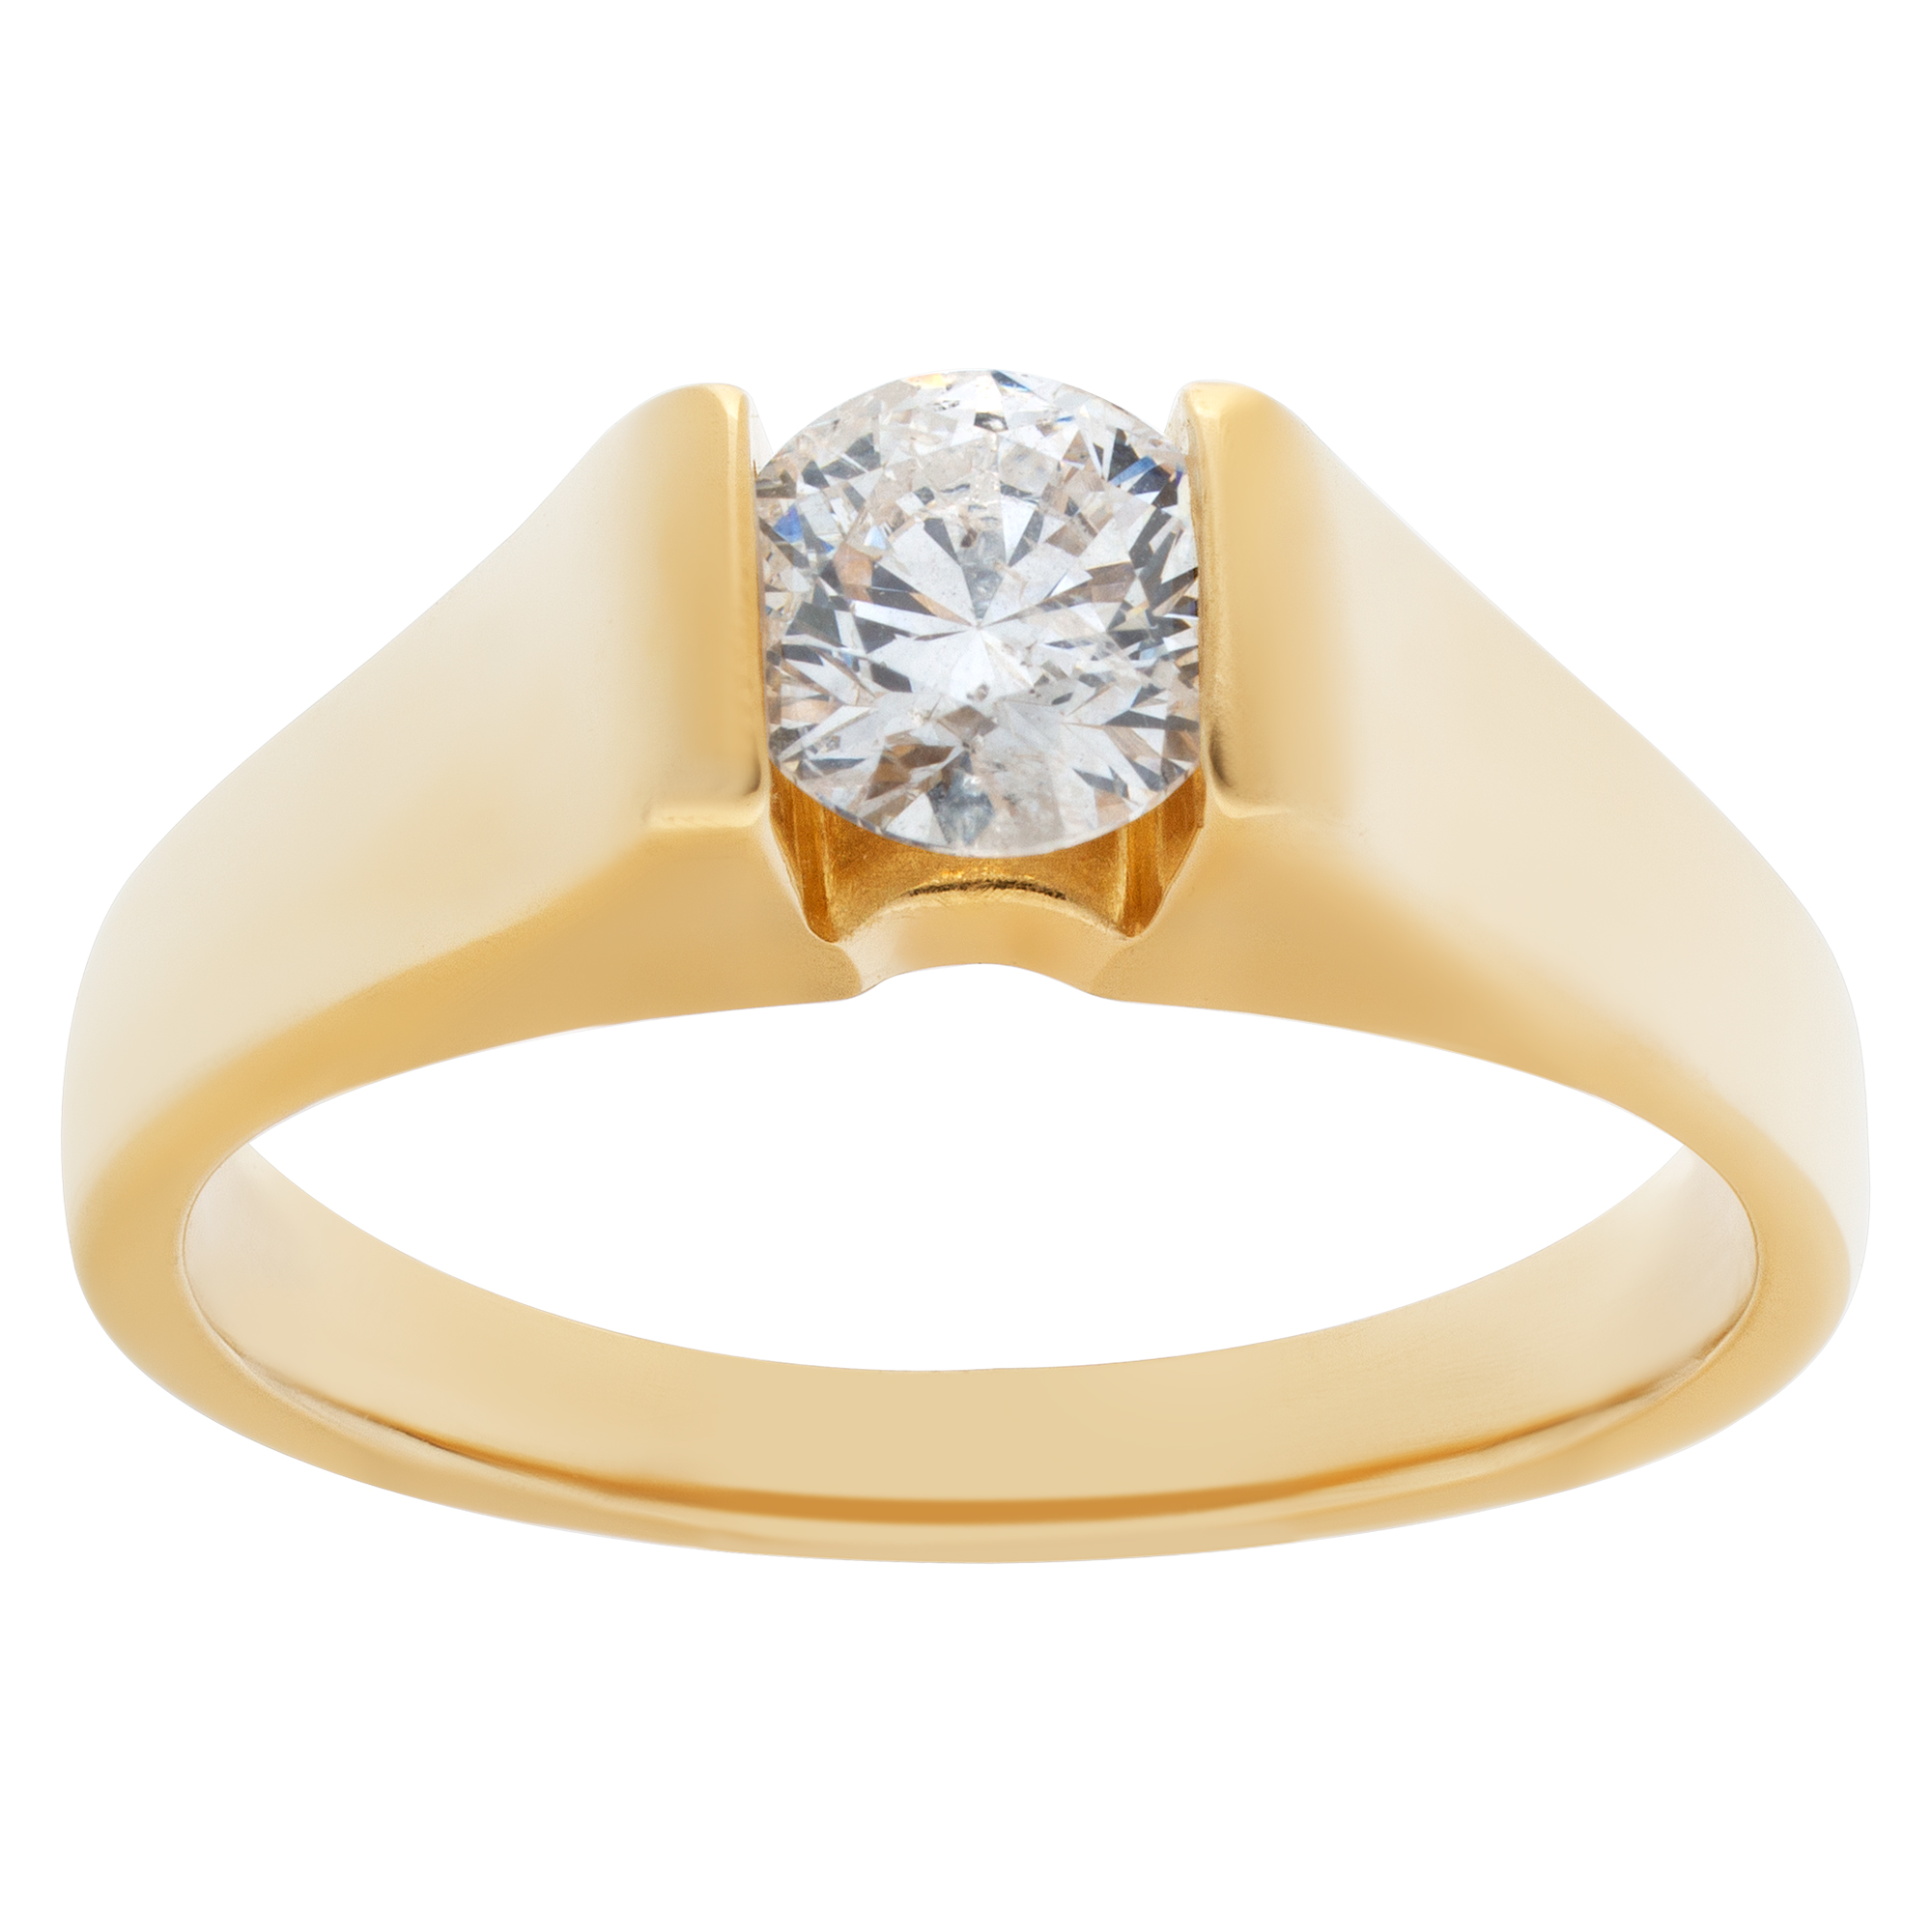 Solitaire diamond ring in 14k with approx. 0.50 carat full cut round brilliant diamond. image 1